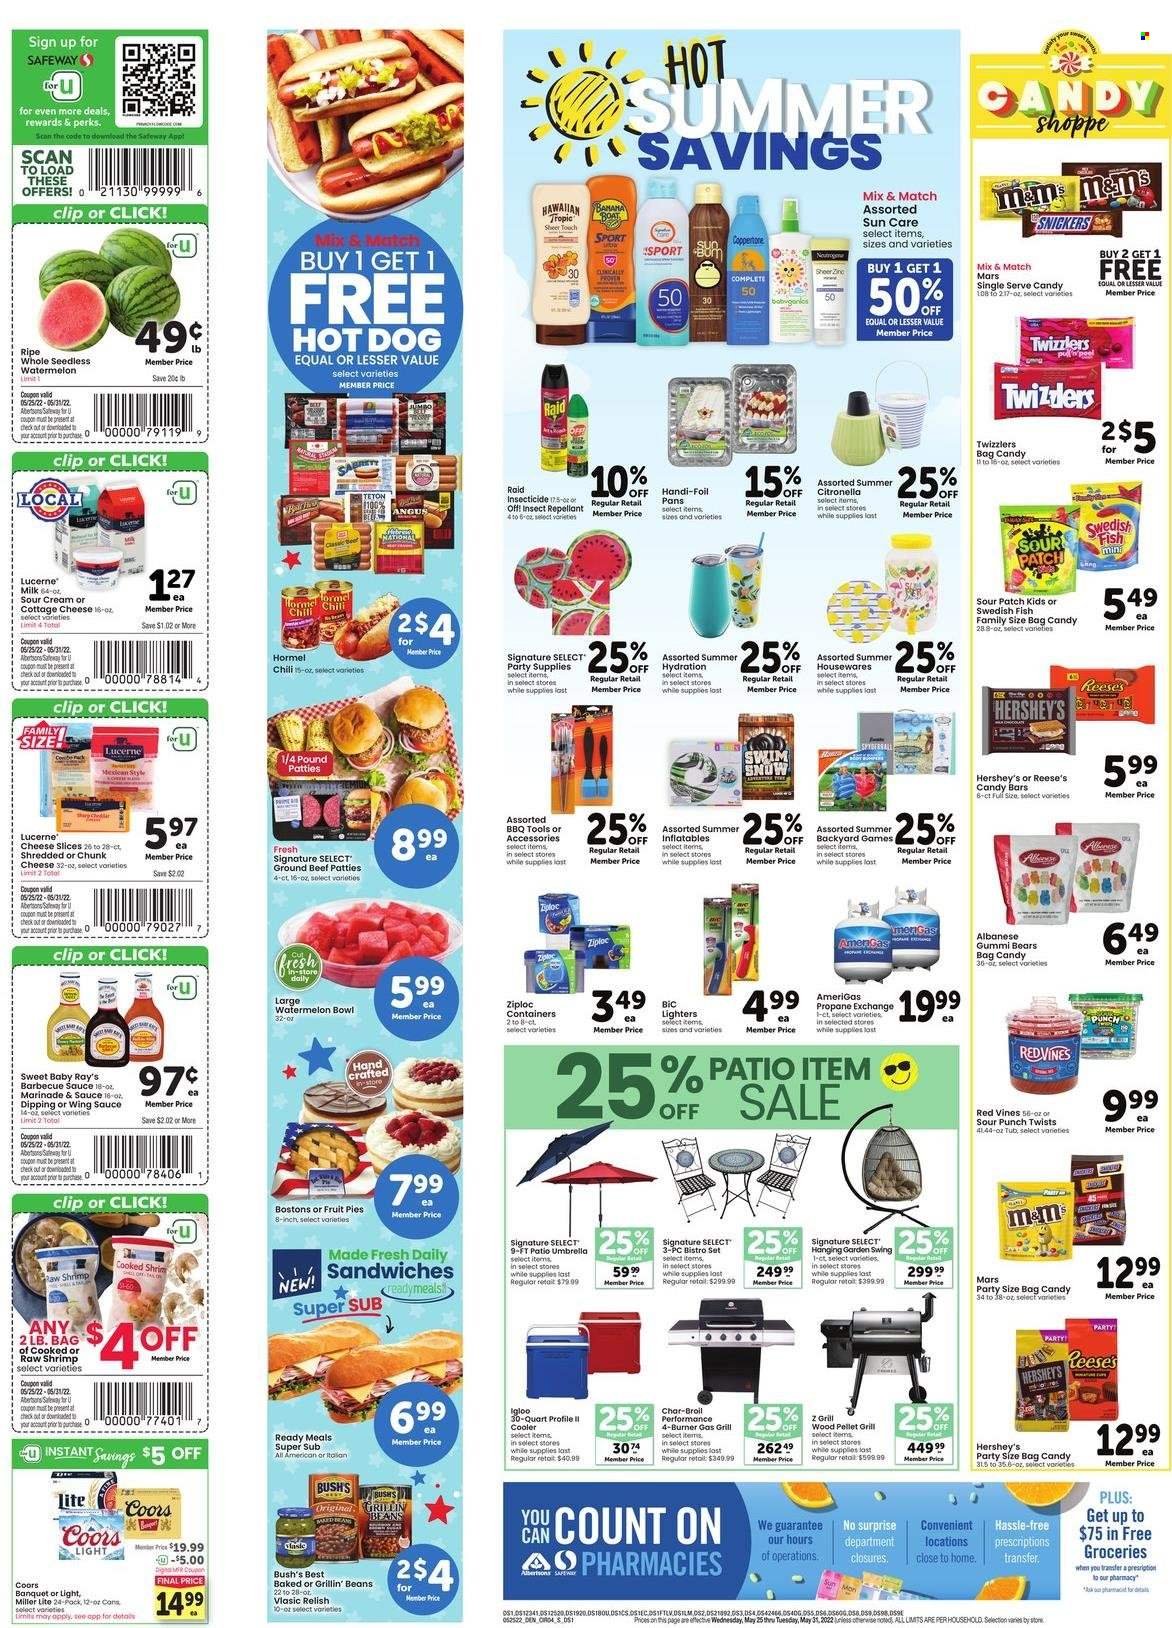 thumbnail - Safeway Flyer - 05/25/2022 - 05/31/2022 - Sales products - beans, watermelon, beef meat, ground beef, shrimps, hot dog, sandwich, Hormel, cottage cheese, sliced cheese, cheese, milk, sour cream, Reese's, Hershey's, Snickers, Mars, M&M's, sour patch, BBQ sauce, marinade, wing sauce, beer, BIC, Ziploc, party supplies, gas grill, pellet grill, AmeriGas, Miller Lite, Coors. Page 4.